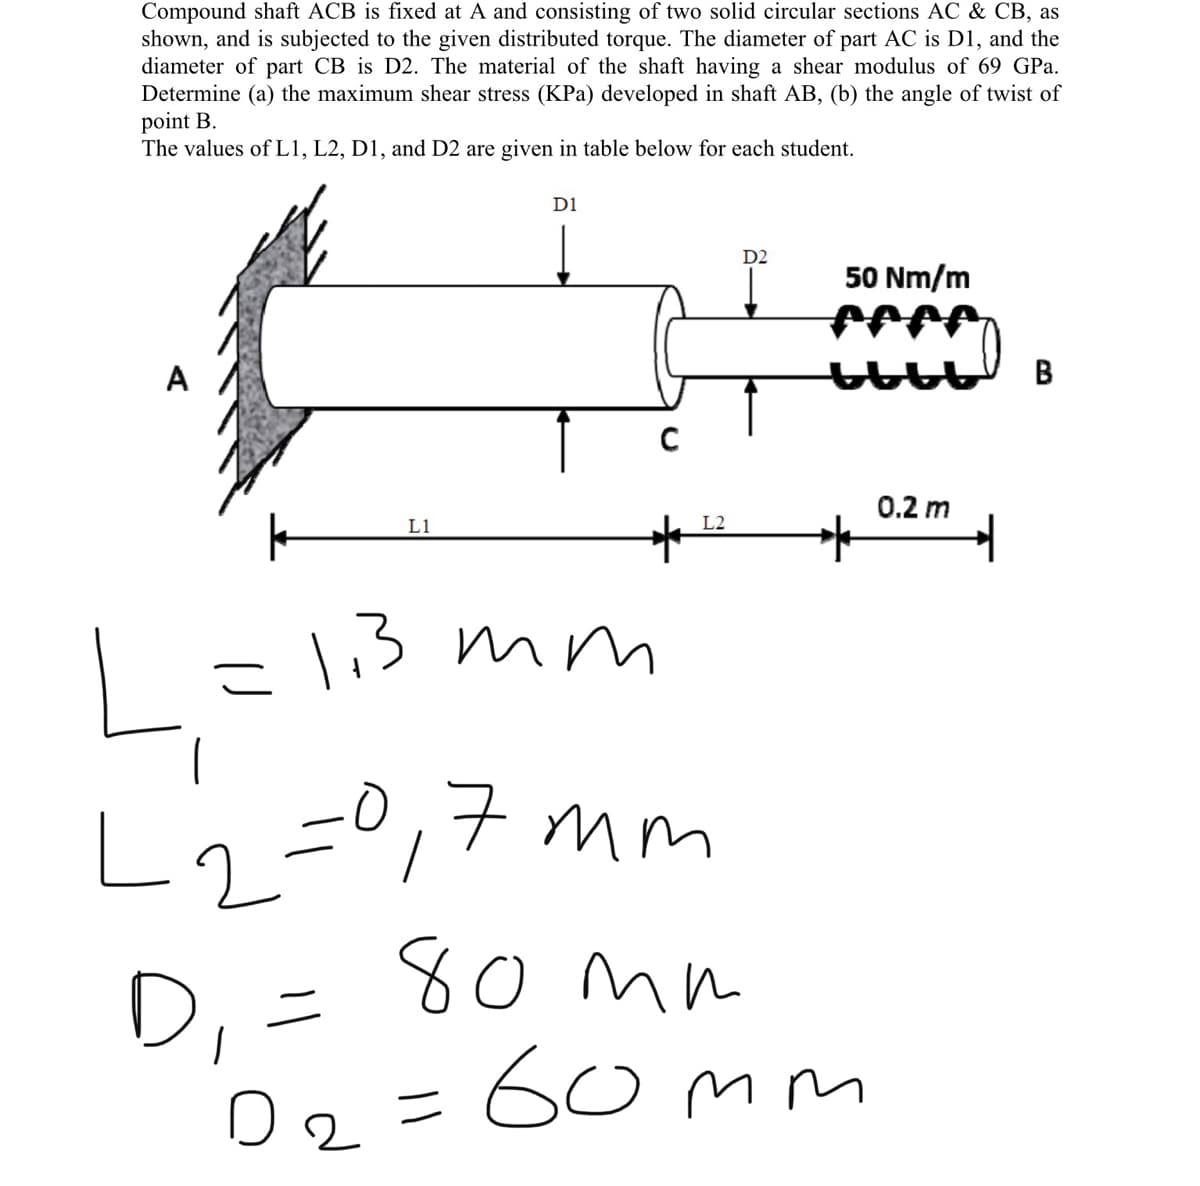 Compound shaft ACB is fixed at A and consisting of two solid circular sections AC & CB, as
shown, and is subjected to the given distributed torque. The diameter of part AC is D1, and the
diameter of part CB is D2. The material of the shaft having a shear modulus of 69 GPa.
Determine (a) the maximum shear stress (KPa) developed in shaft AB, (b) the angle of twist of
point B.
The values of L1, L2, D1, and D2 are given in table below for each student.
D1
D2
50 Nm/m
A
B
0.2 m
L1
L2
=l13 mm
1.3
L2=0,7 mm
80mm
60mm
D, =
